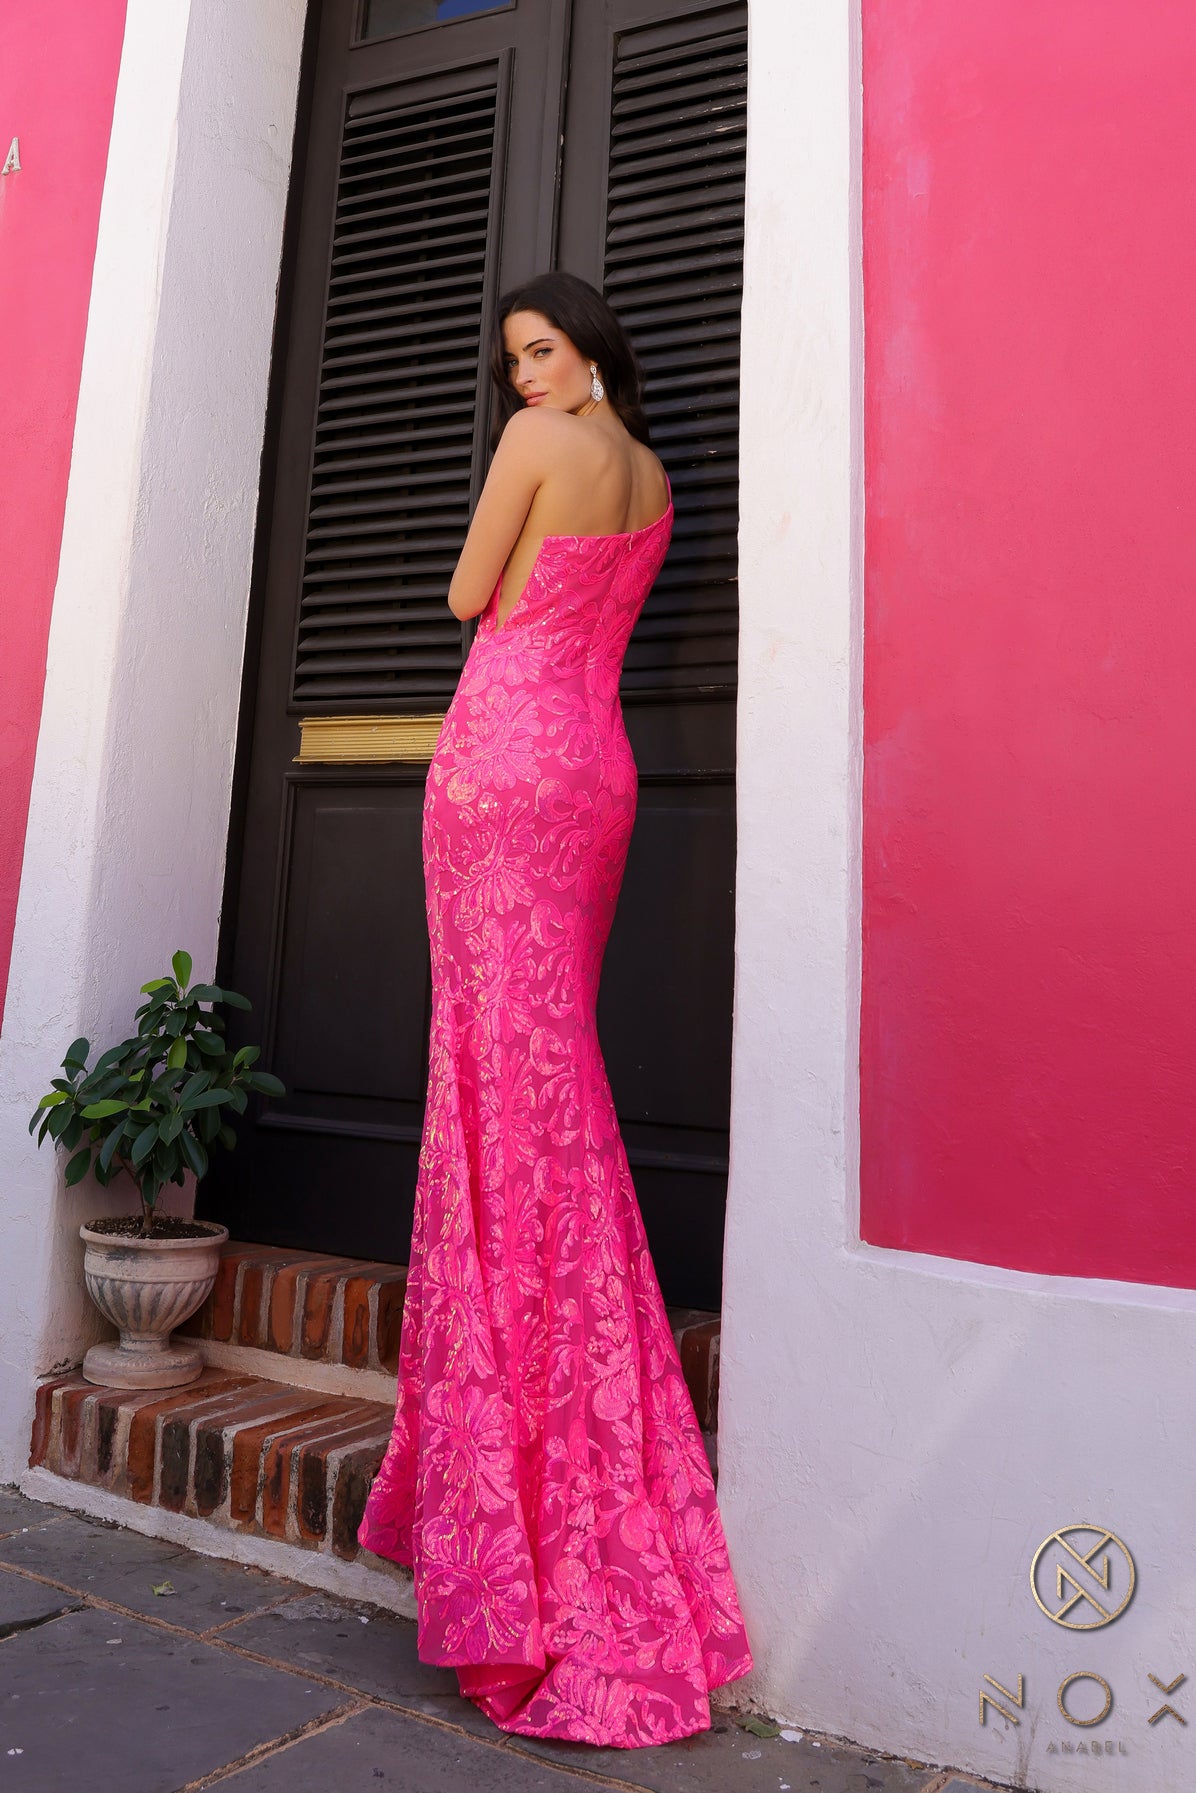 Nox Anabel R1308 Long Sequin Lace One Shoulder Prom Dress Mermaid Formal Gown Pageant